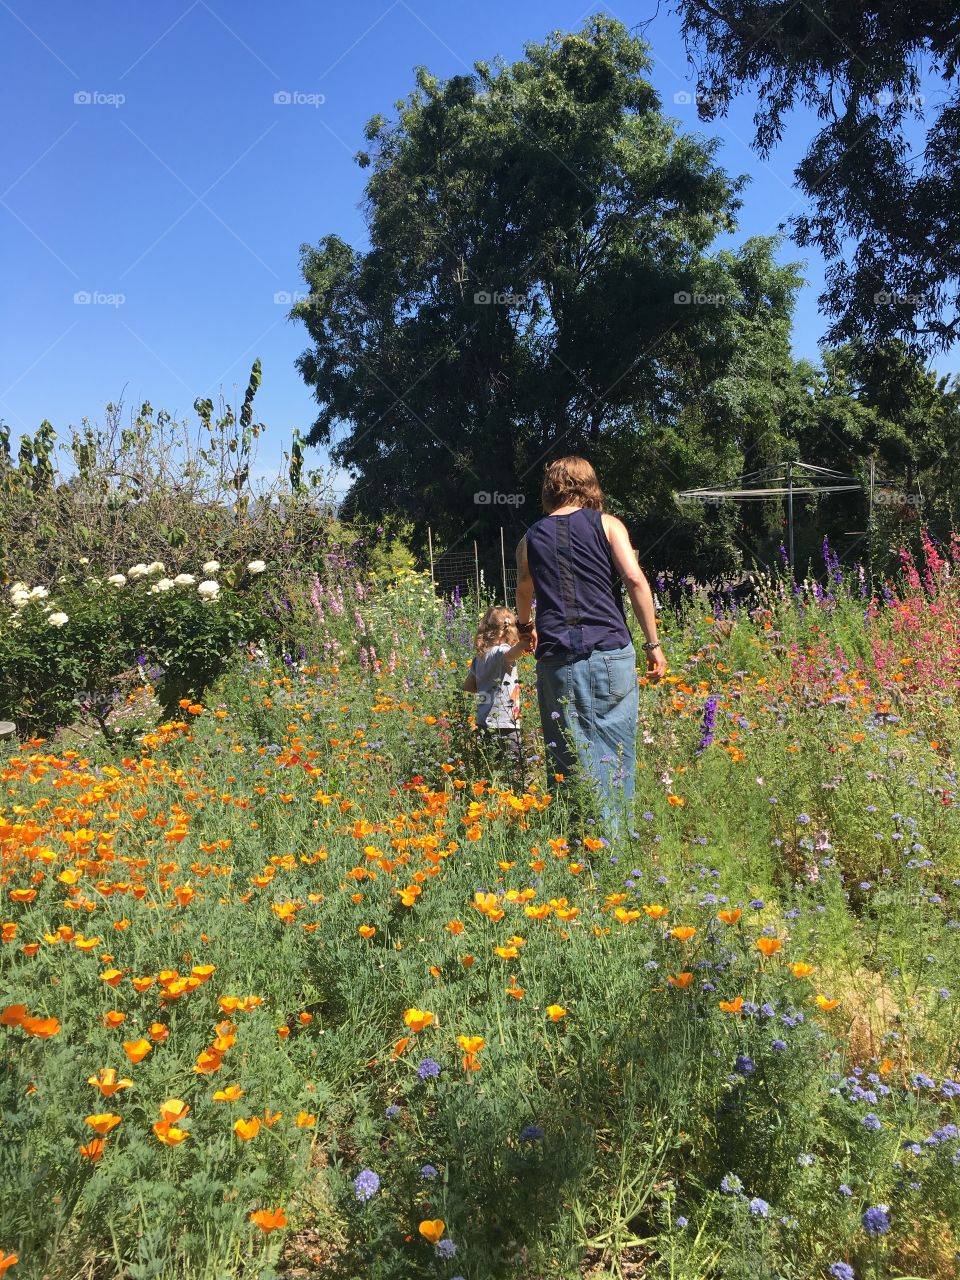 Walking through the garden with a child